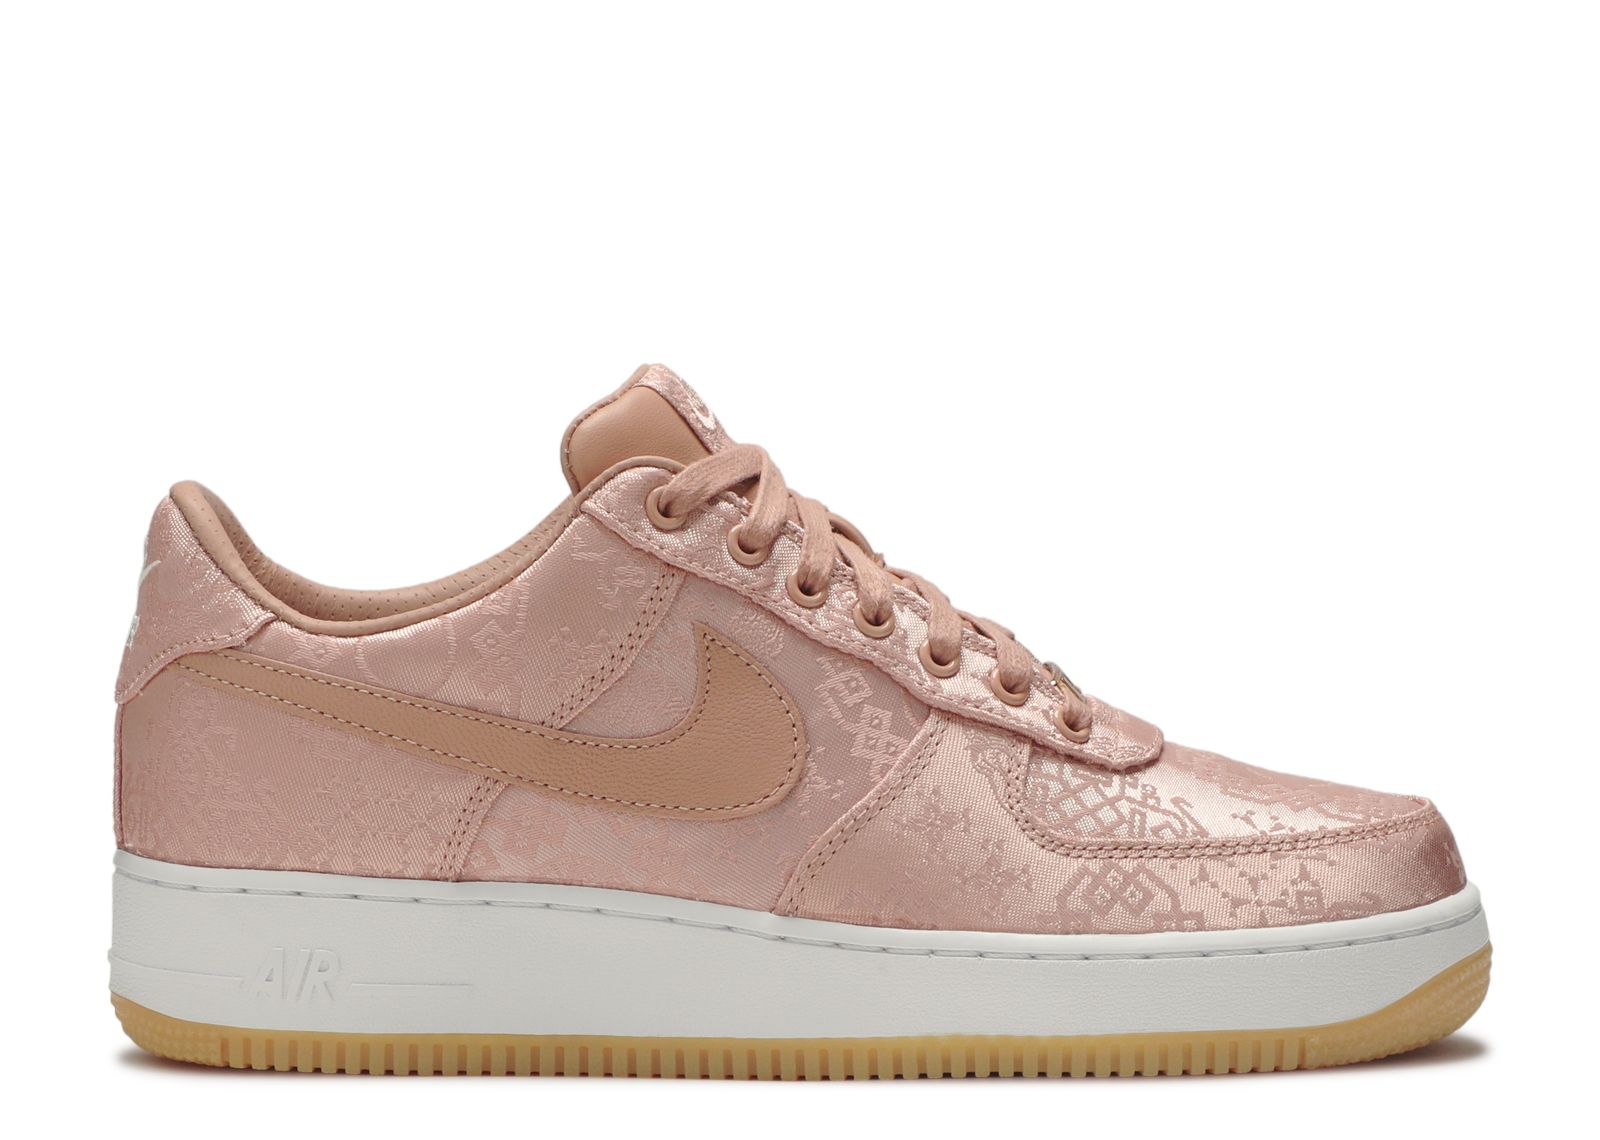 air force 1 clot rose gold release